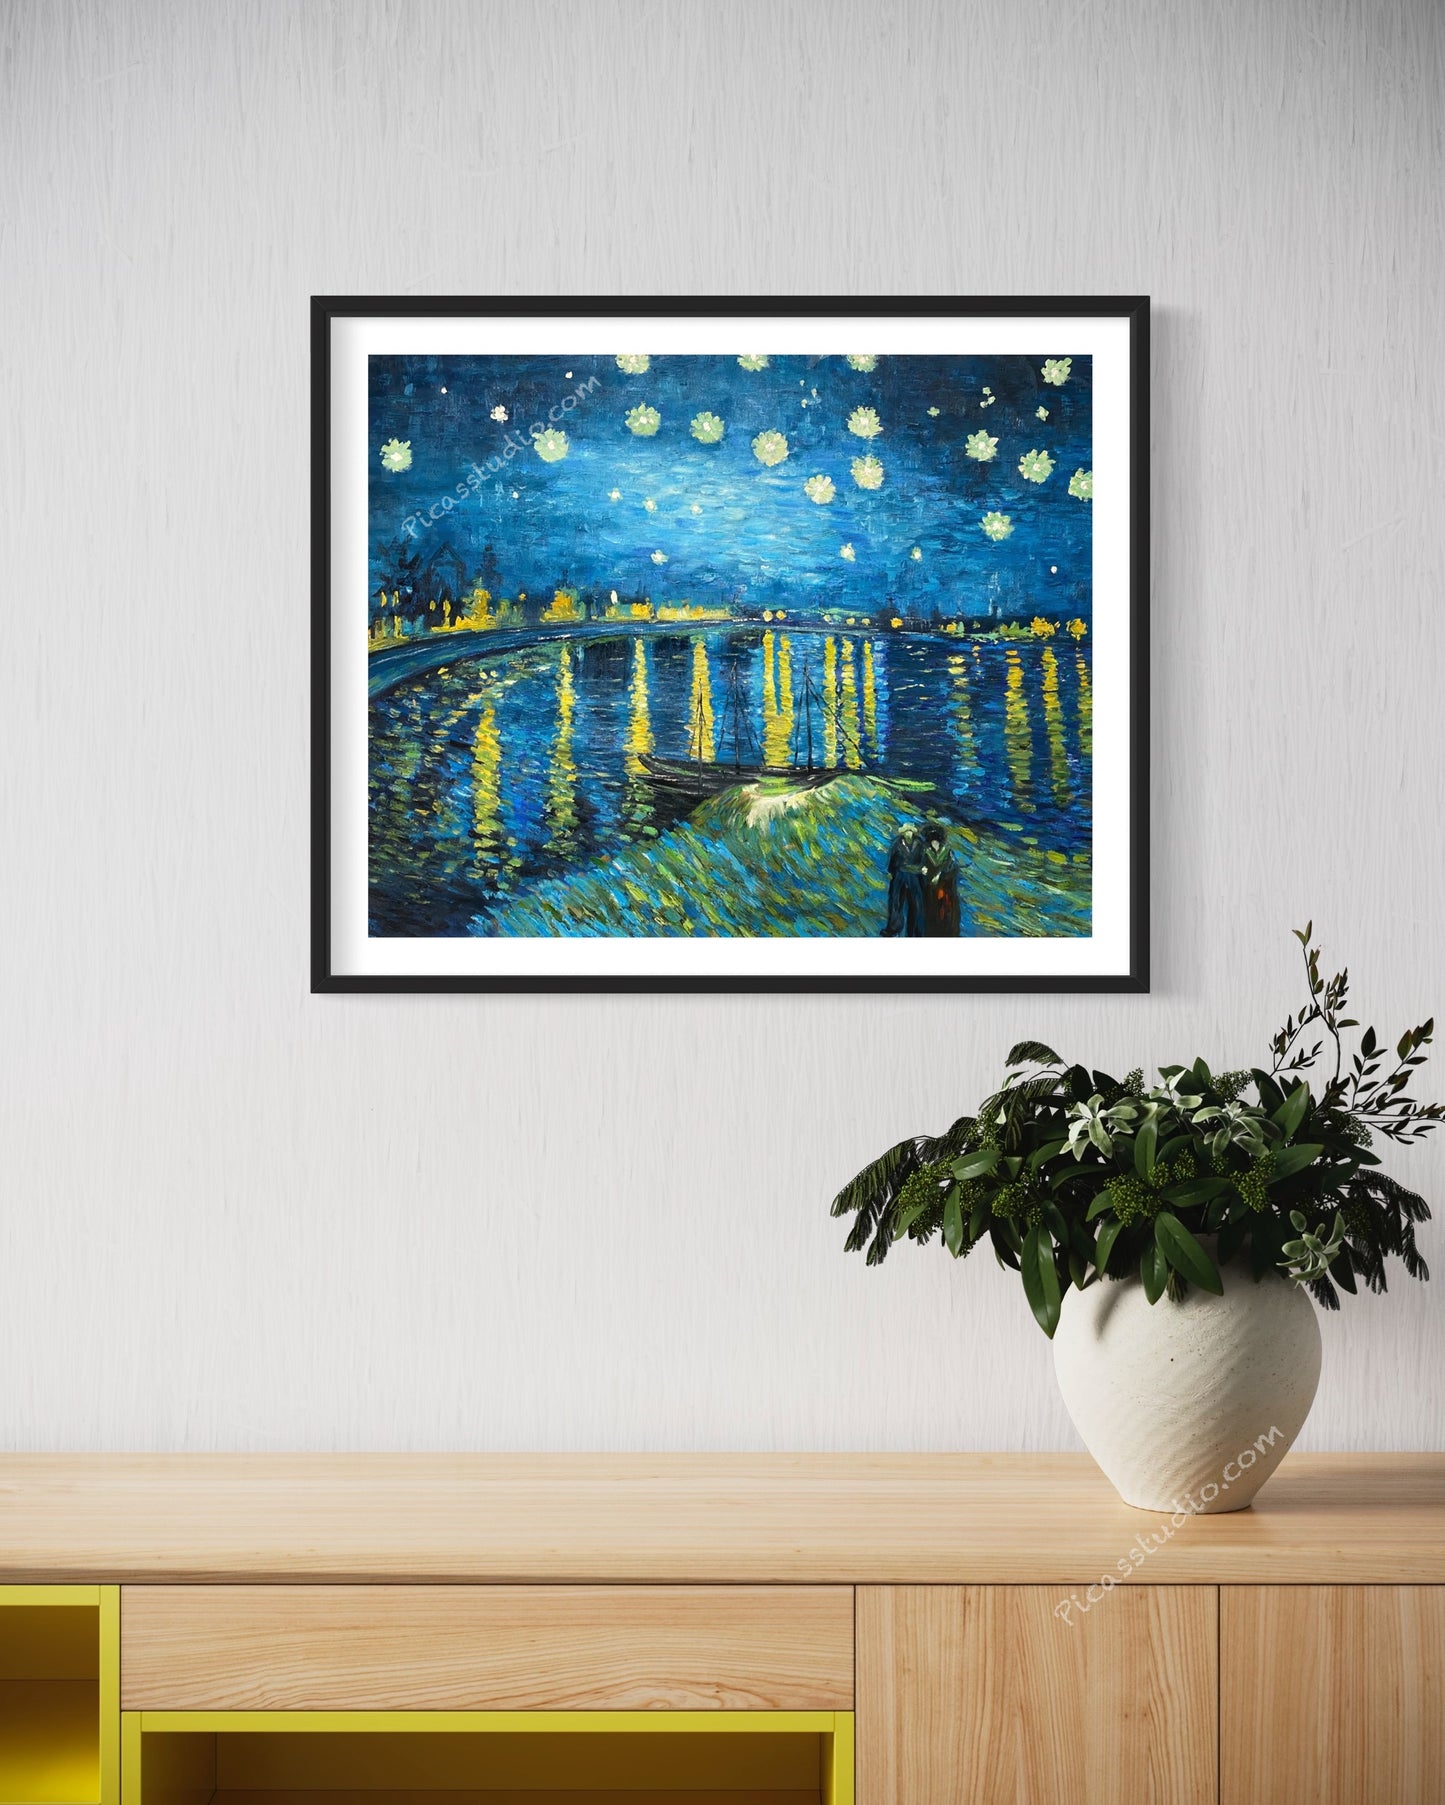 Vincent van Gogh Oil Painting The Starry Night Over The Rhone Hand Painted Art on Canvas Wall Decor Unframed